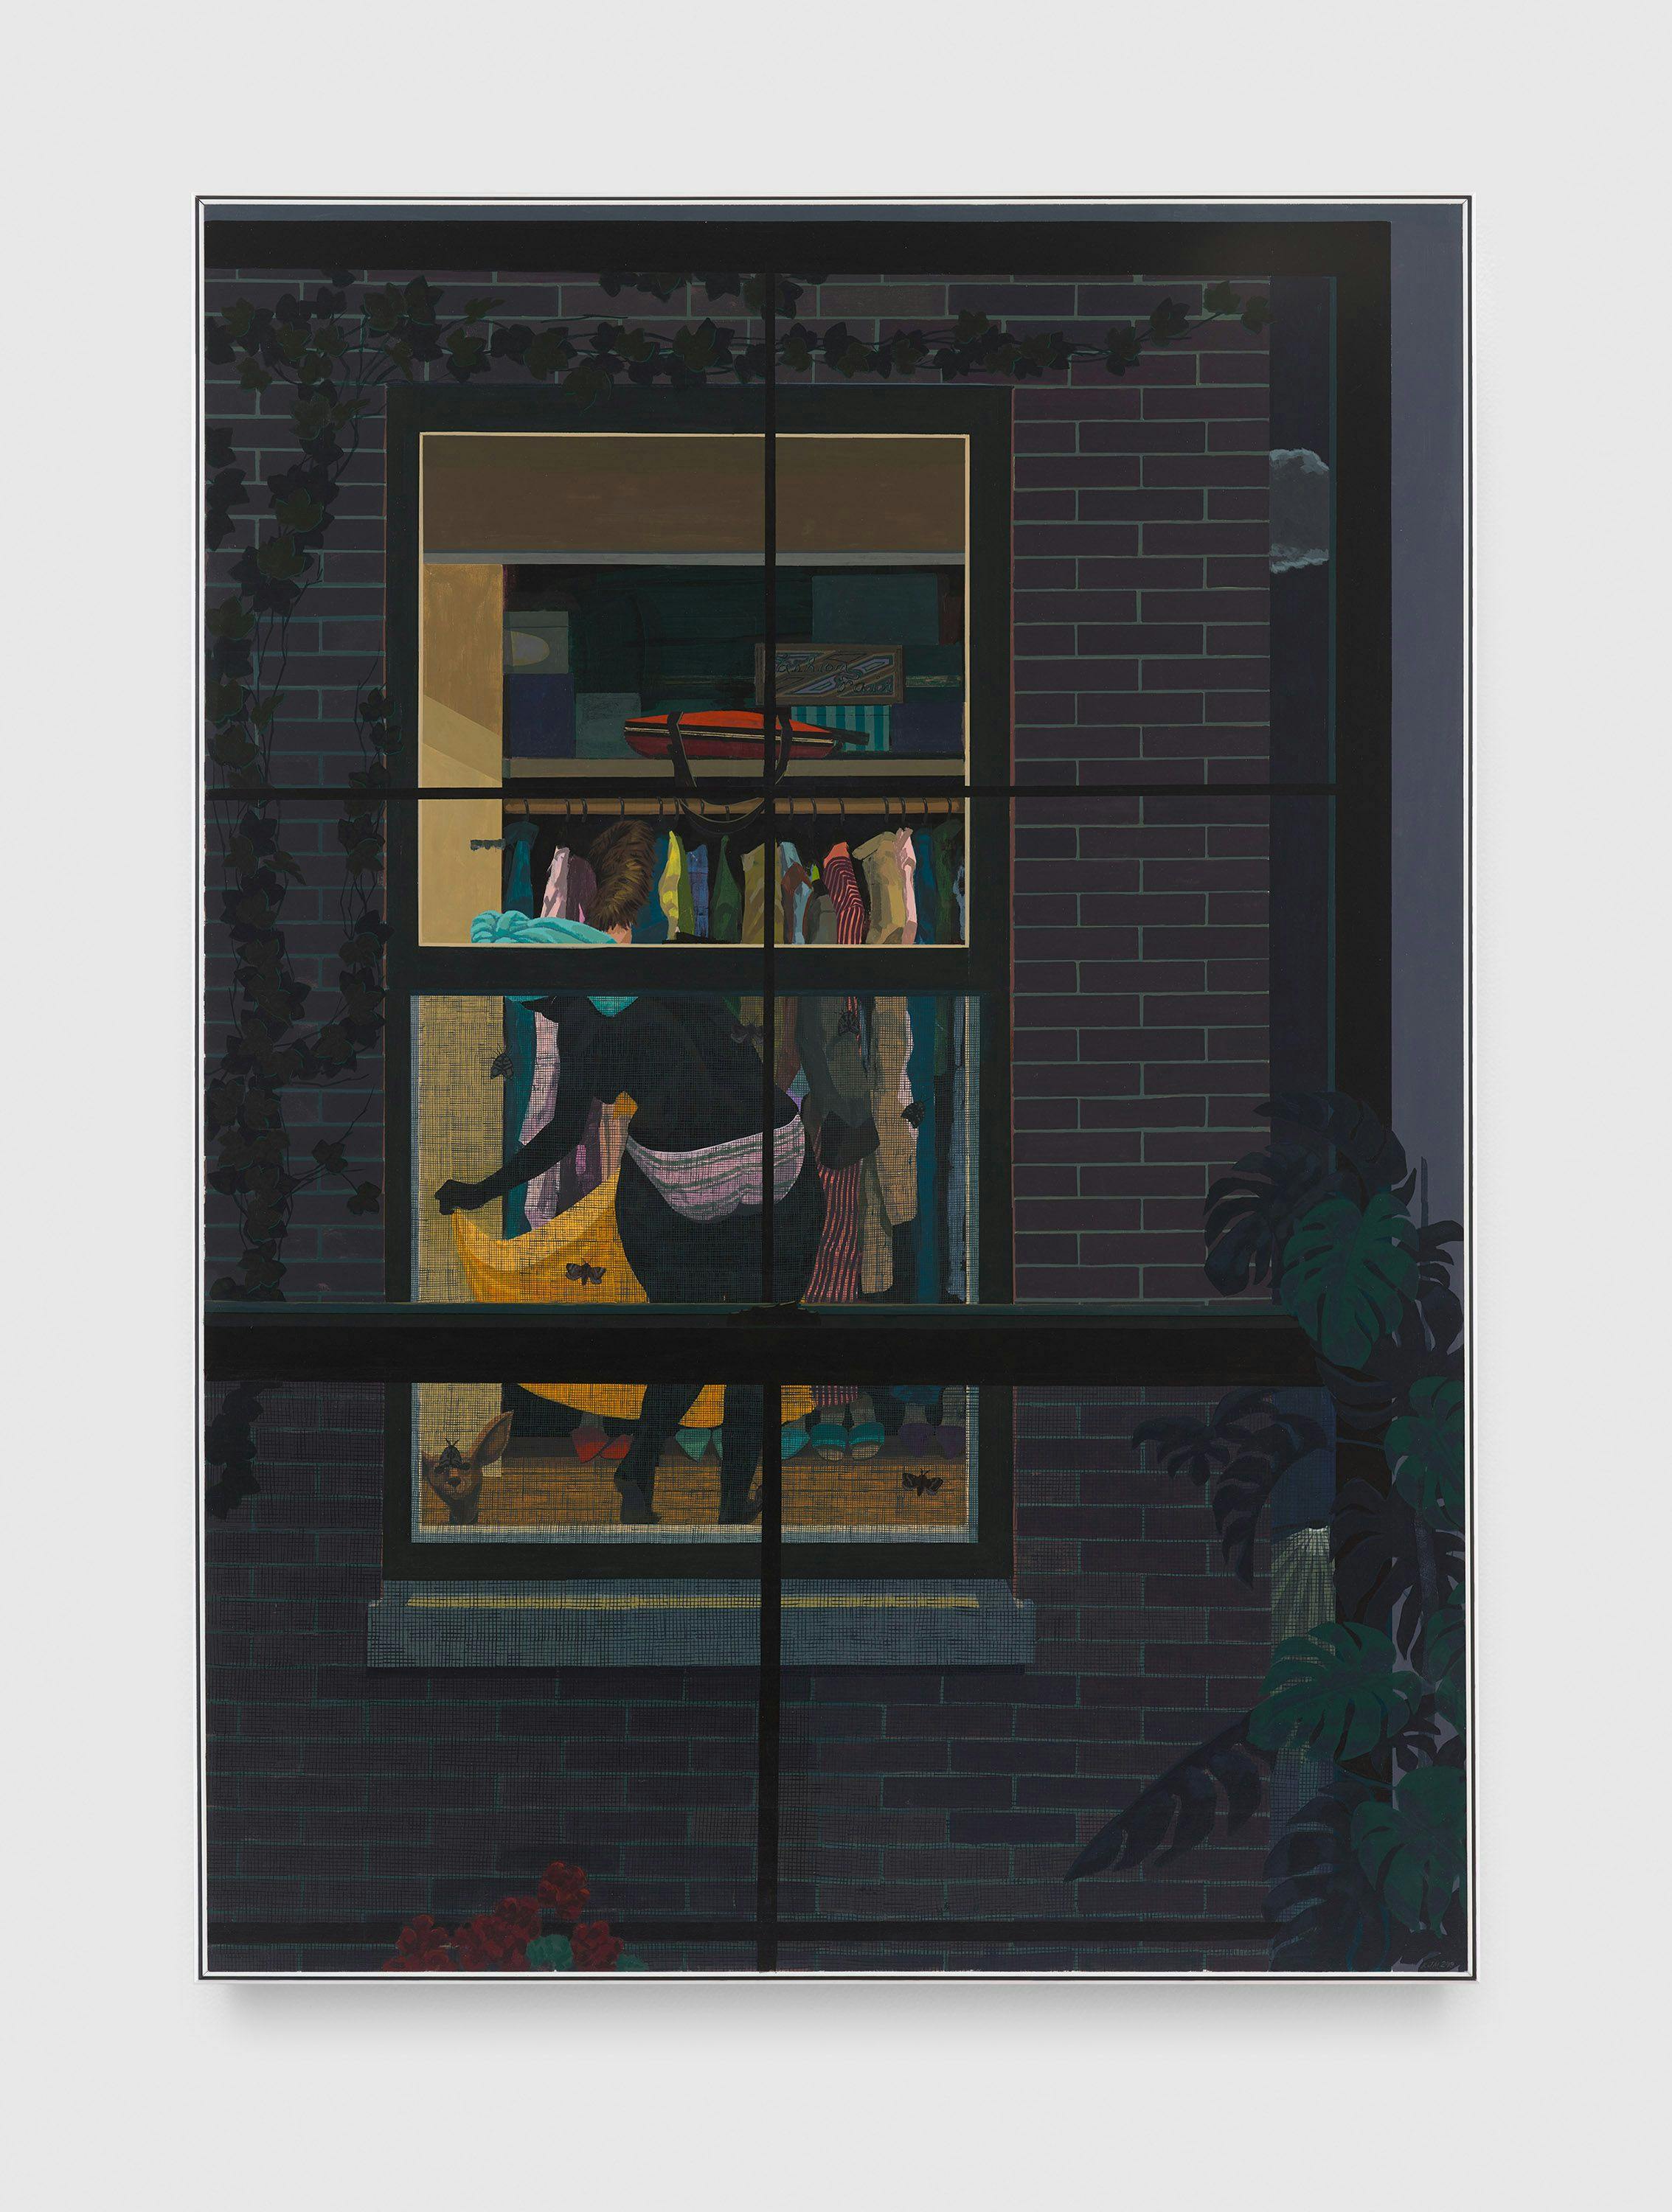 An untitled painting by Kerry James Marshall, dated 2018.